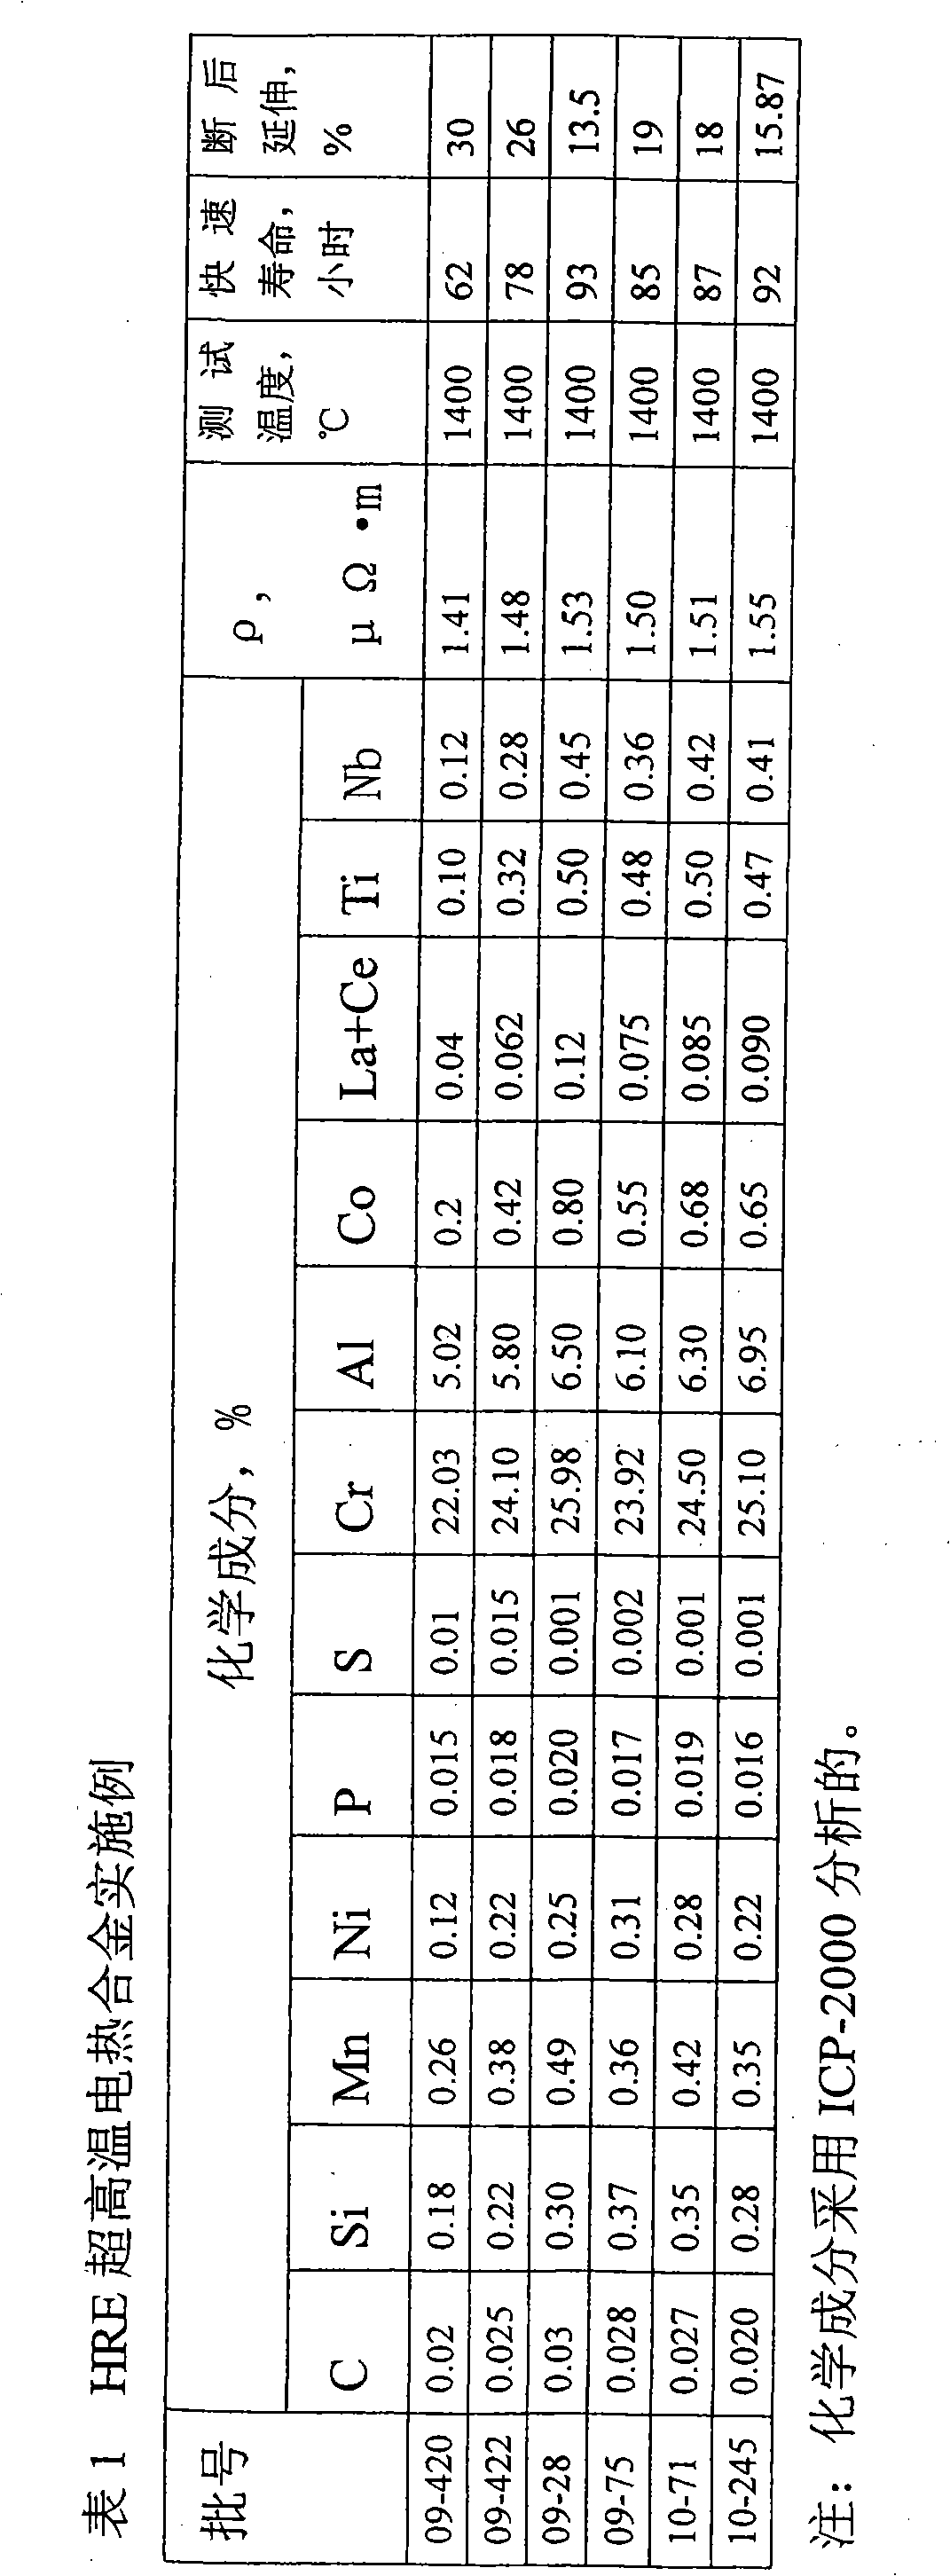 Ultra-high temperature electrothermal alloy and preparation method thereof